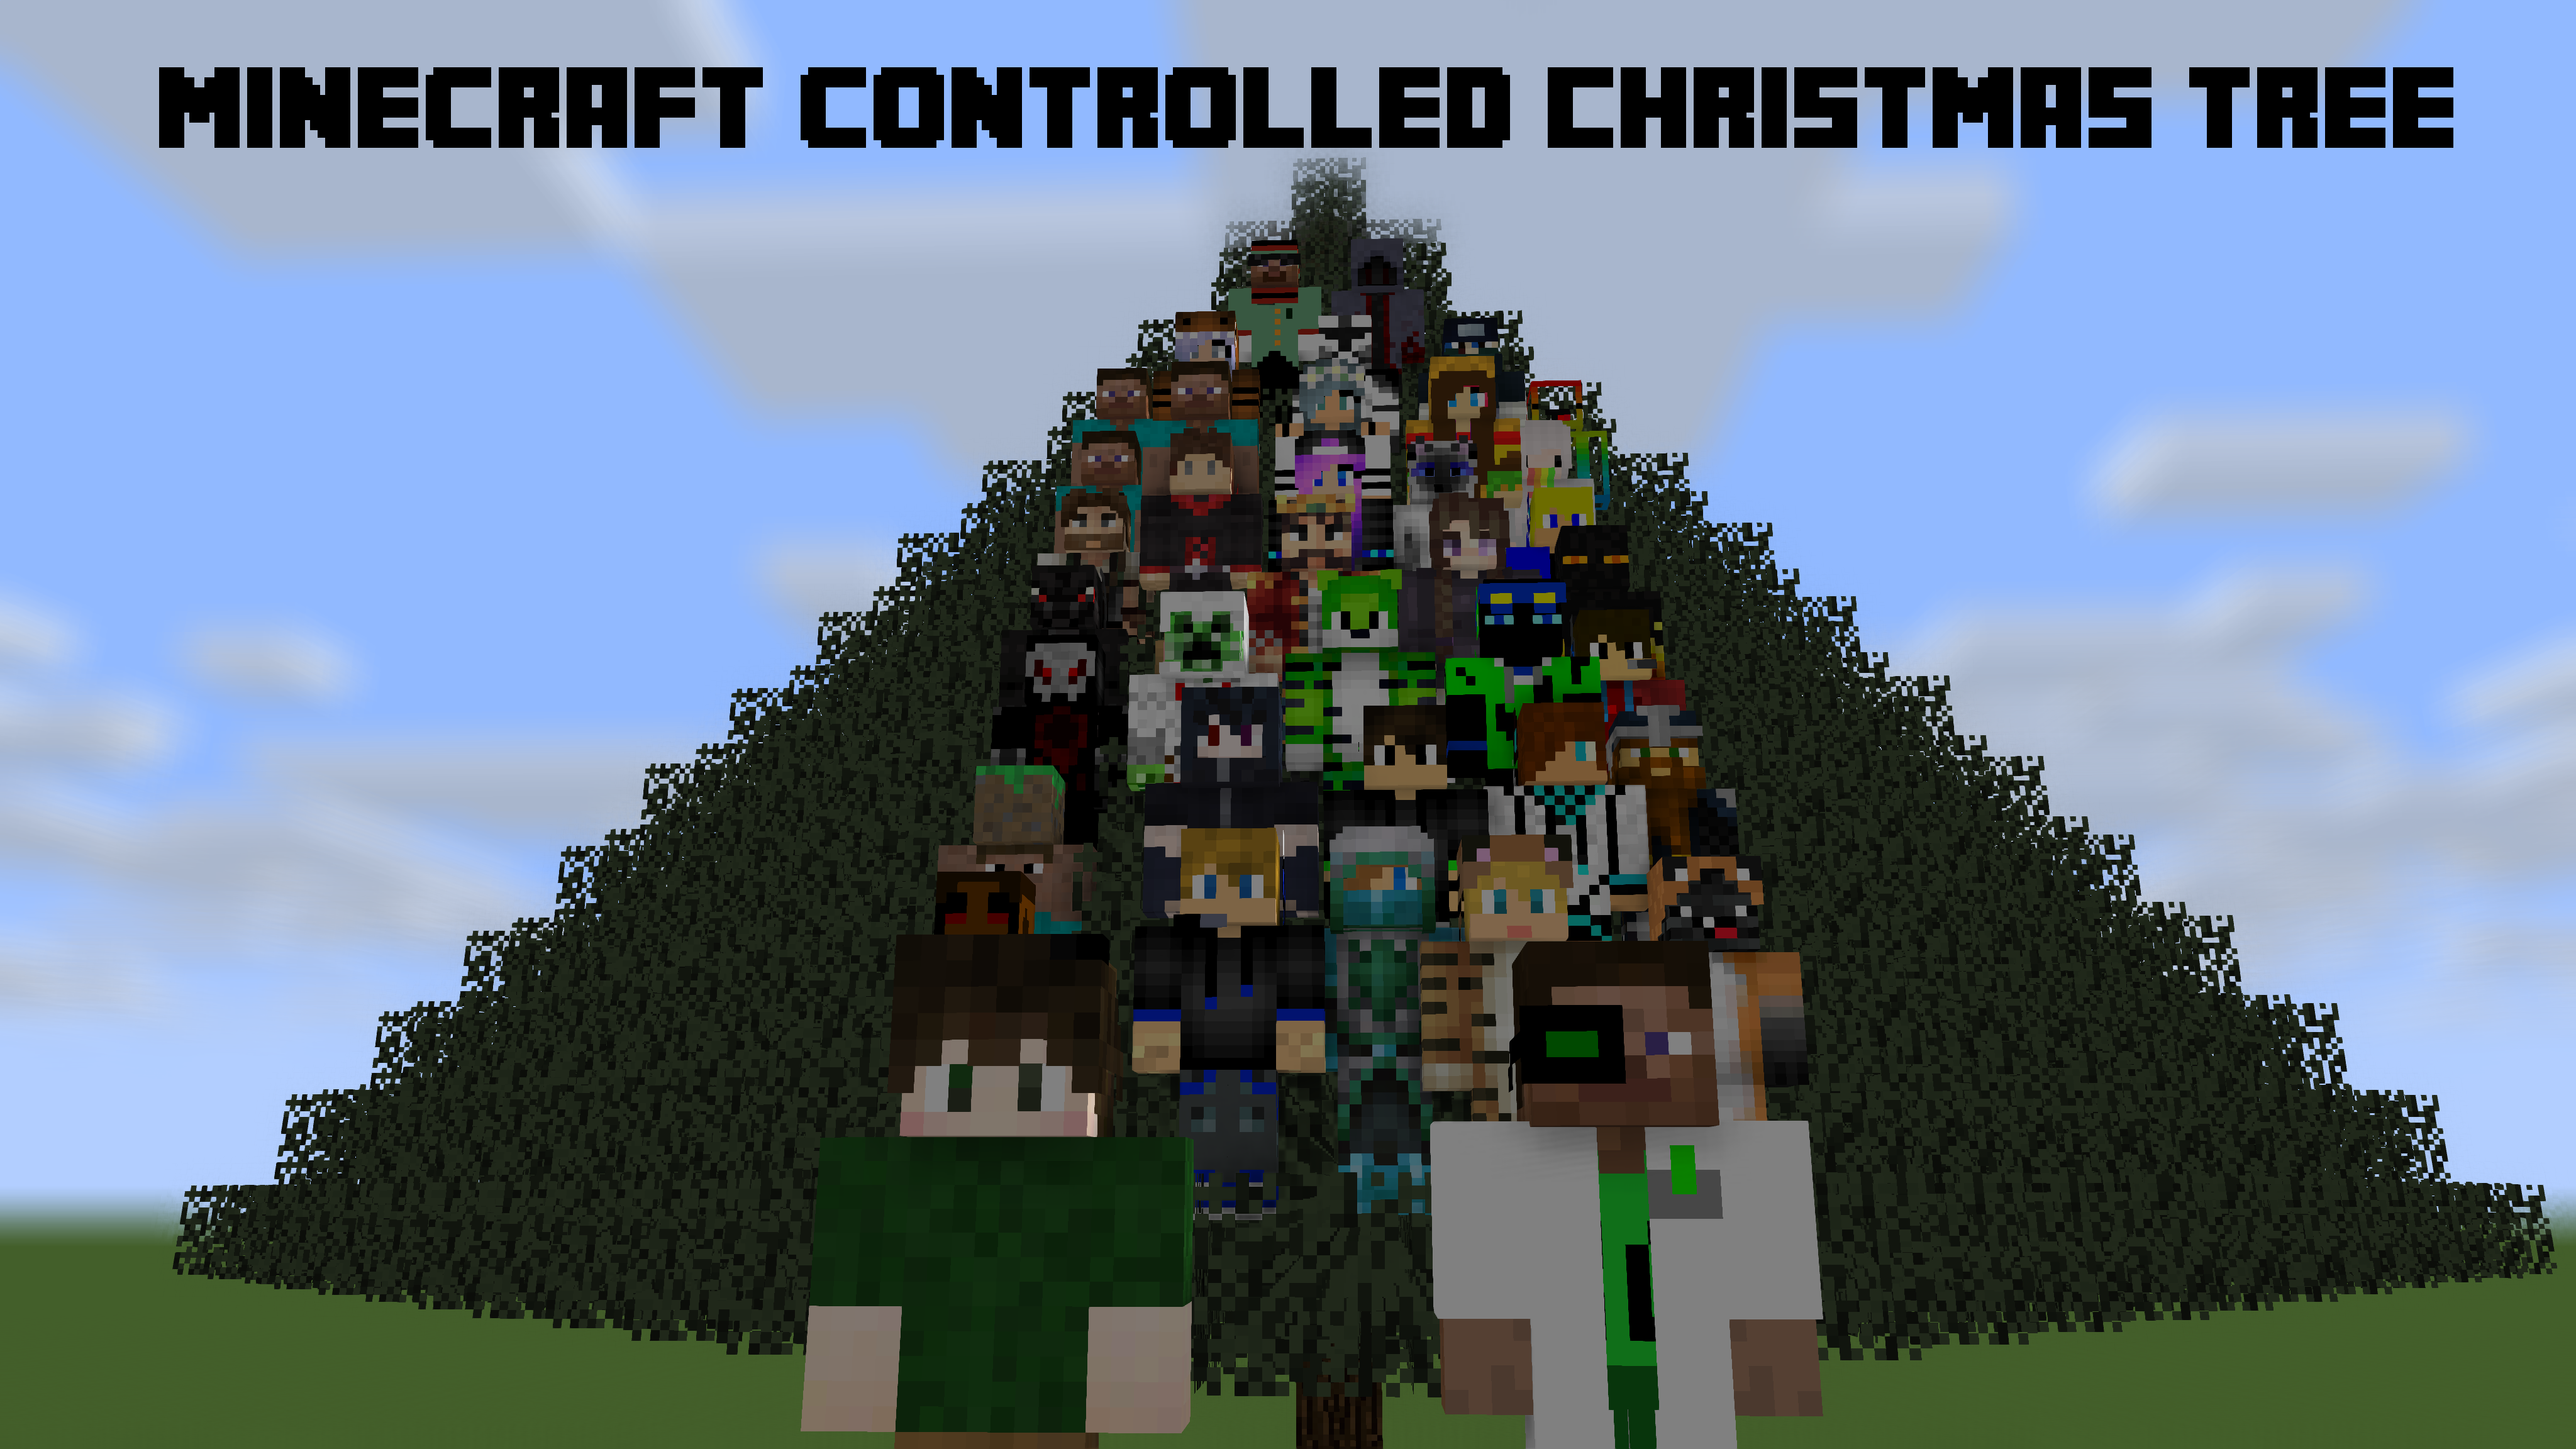 Minecraft Controlled Christmas Tree: 40 Players by Dlljs on DeviantArt